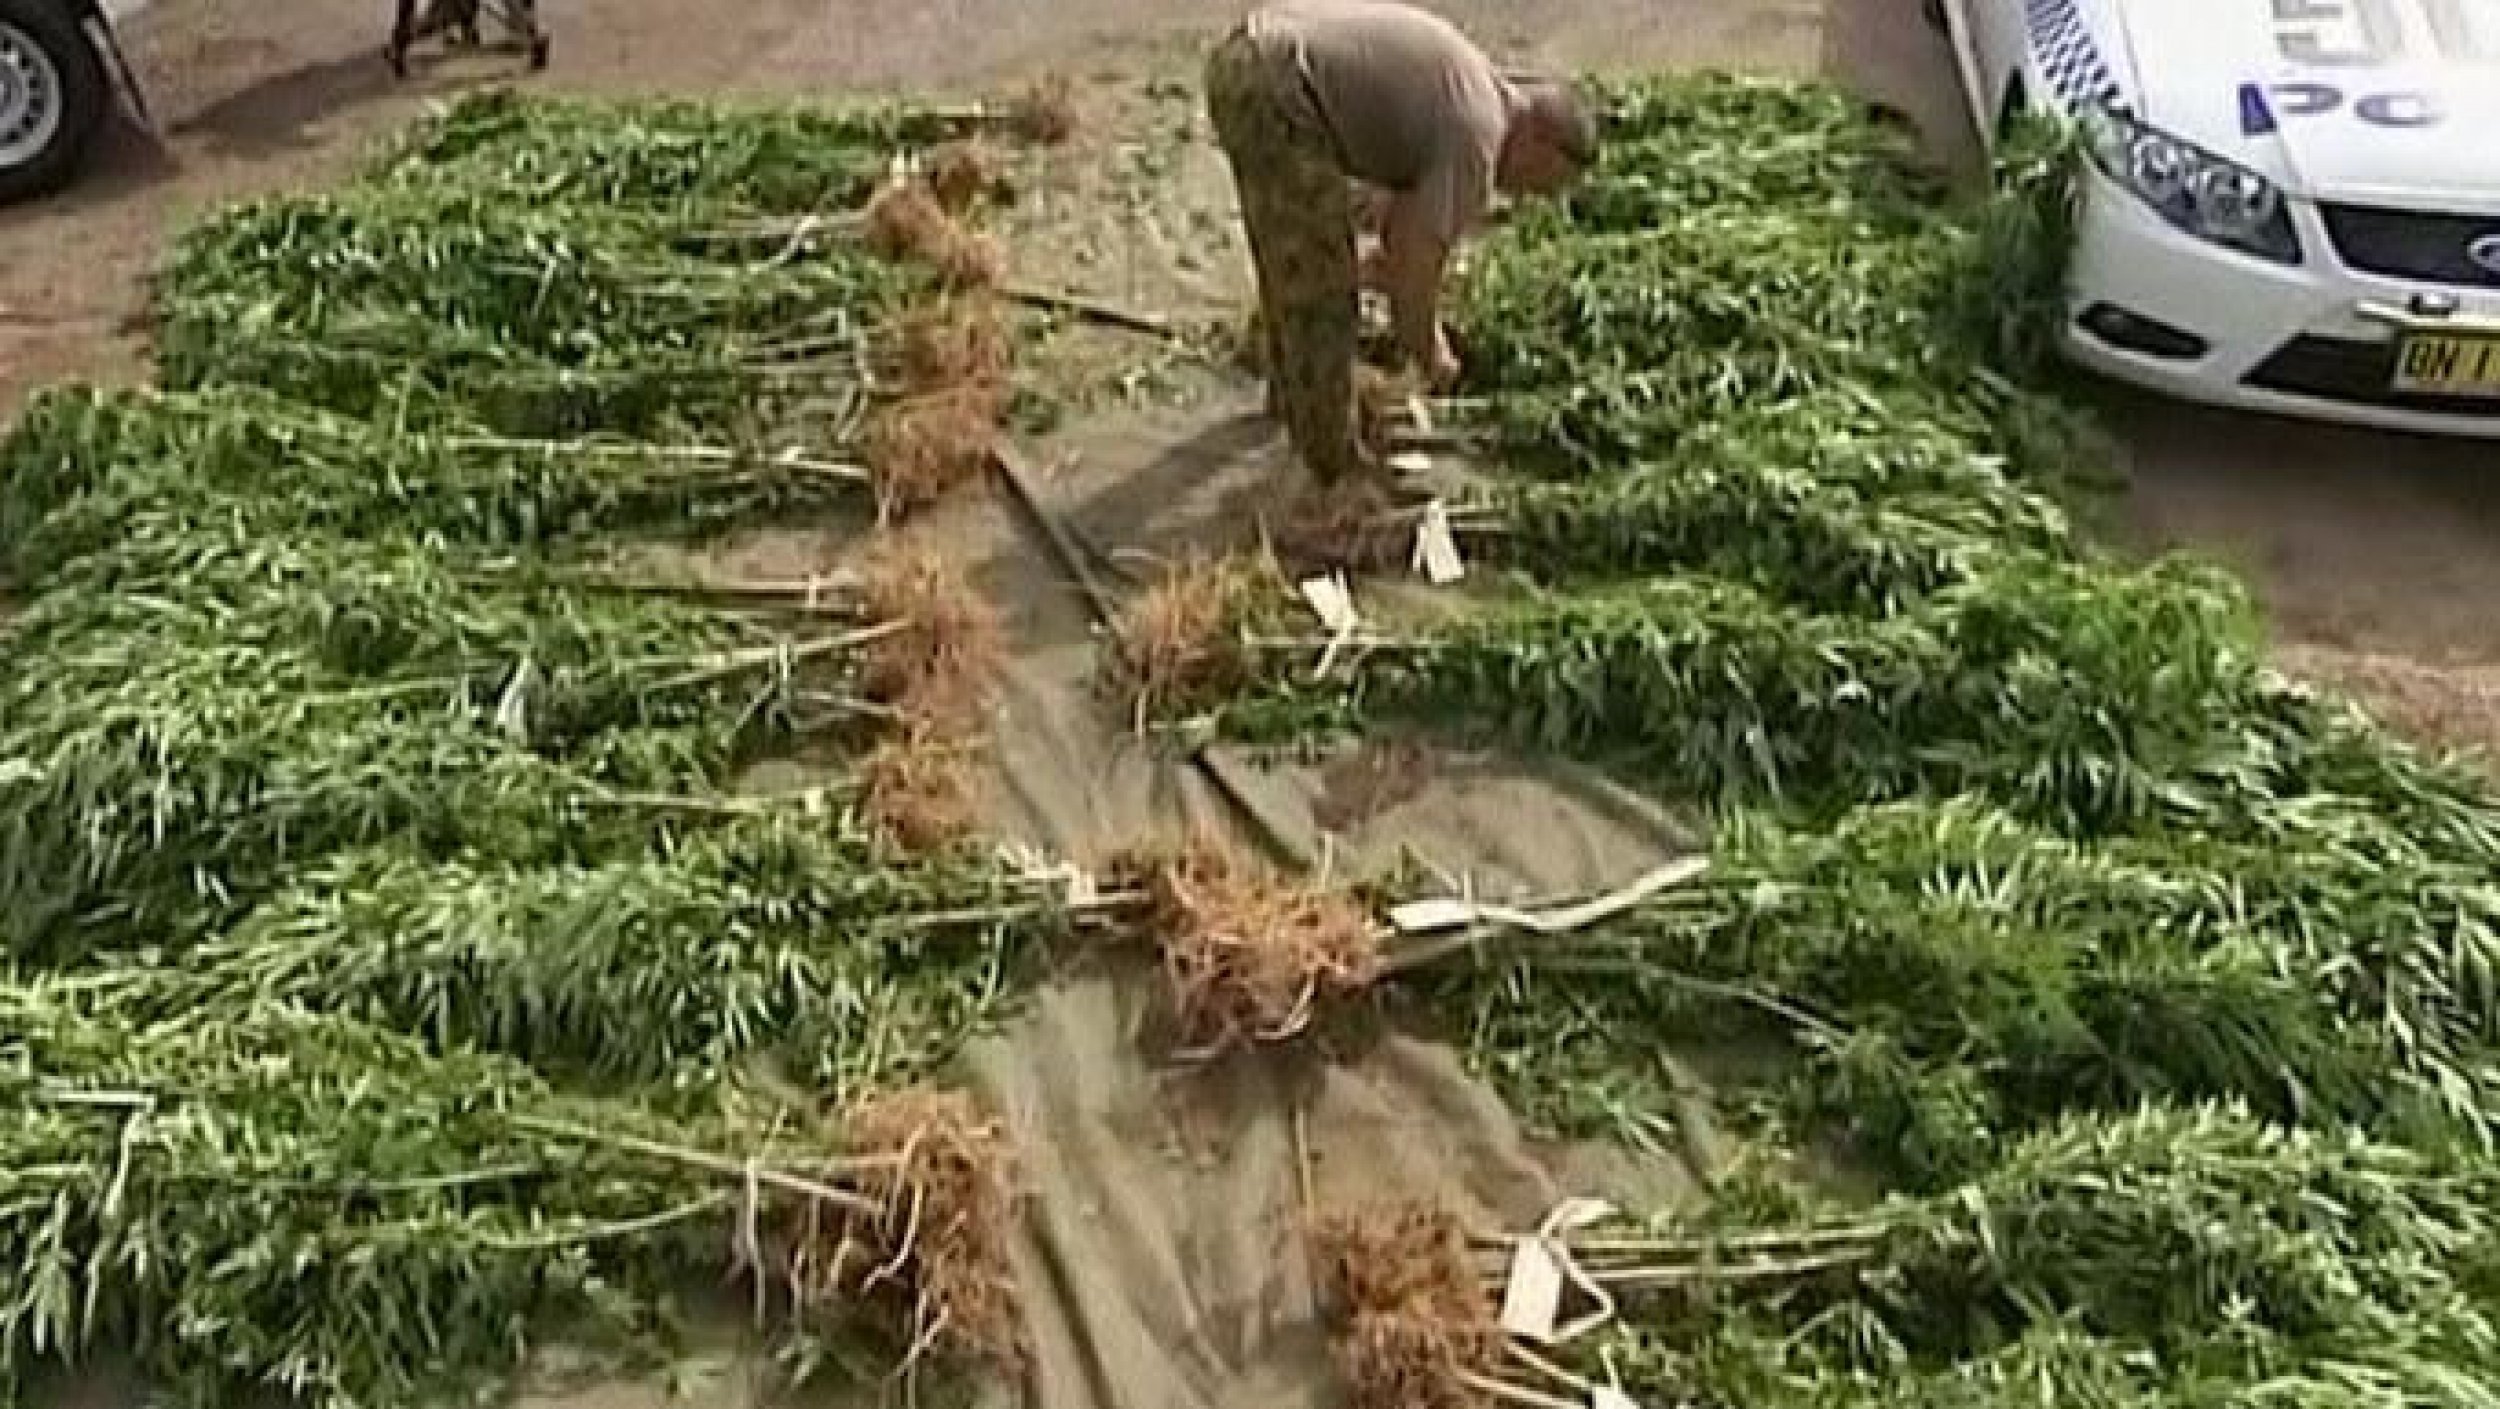 Australian Police Seize Over 300,000 Worth Of Cannabis